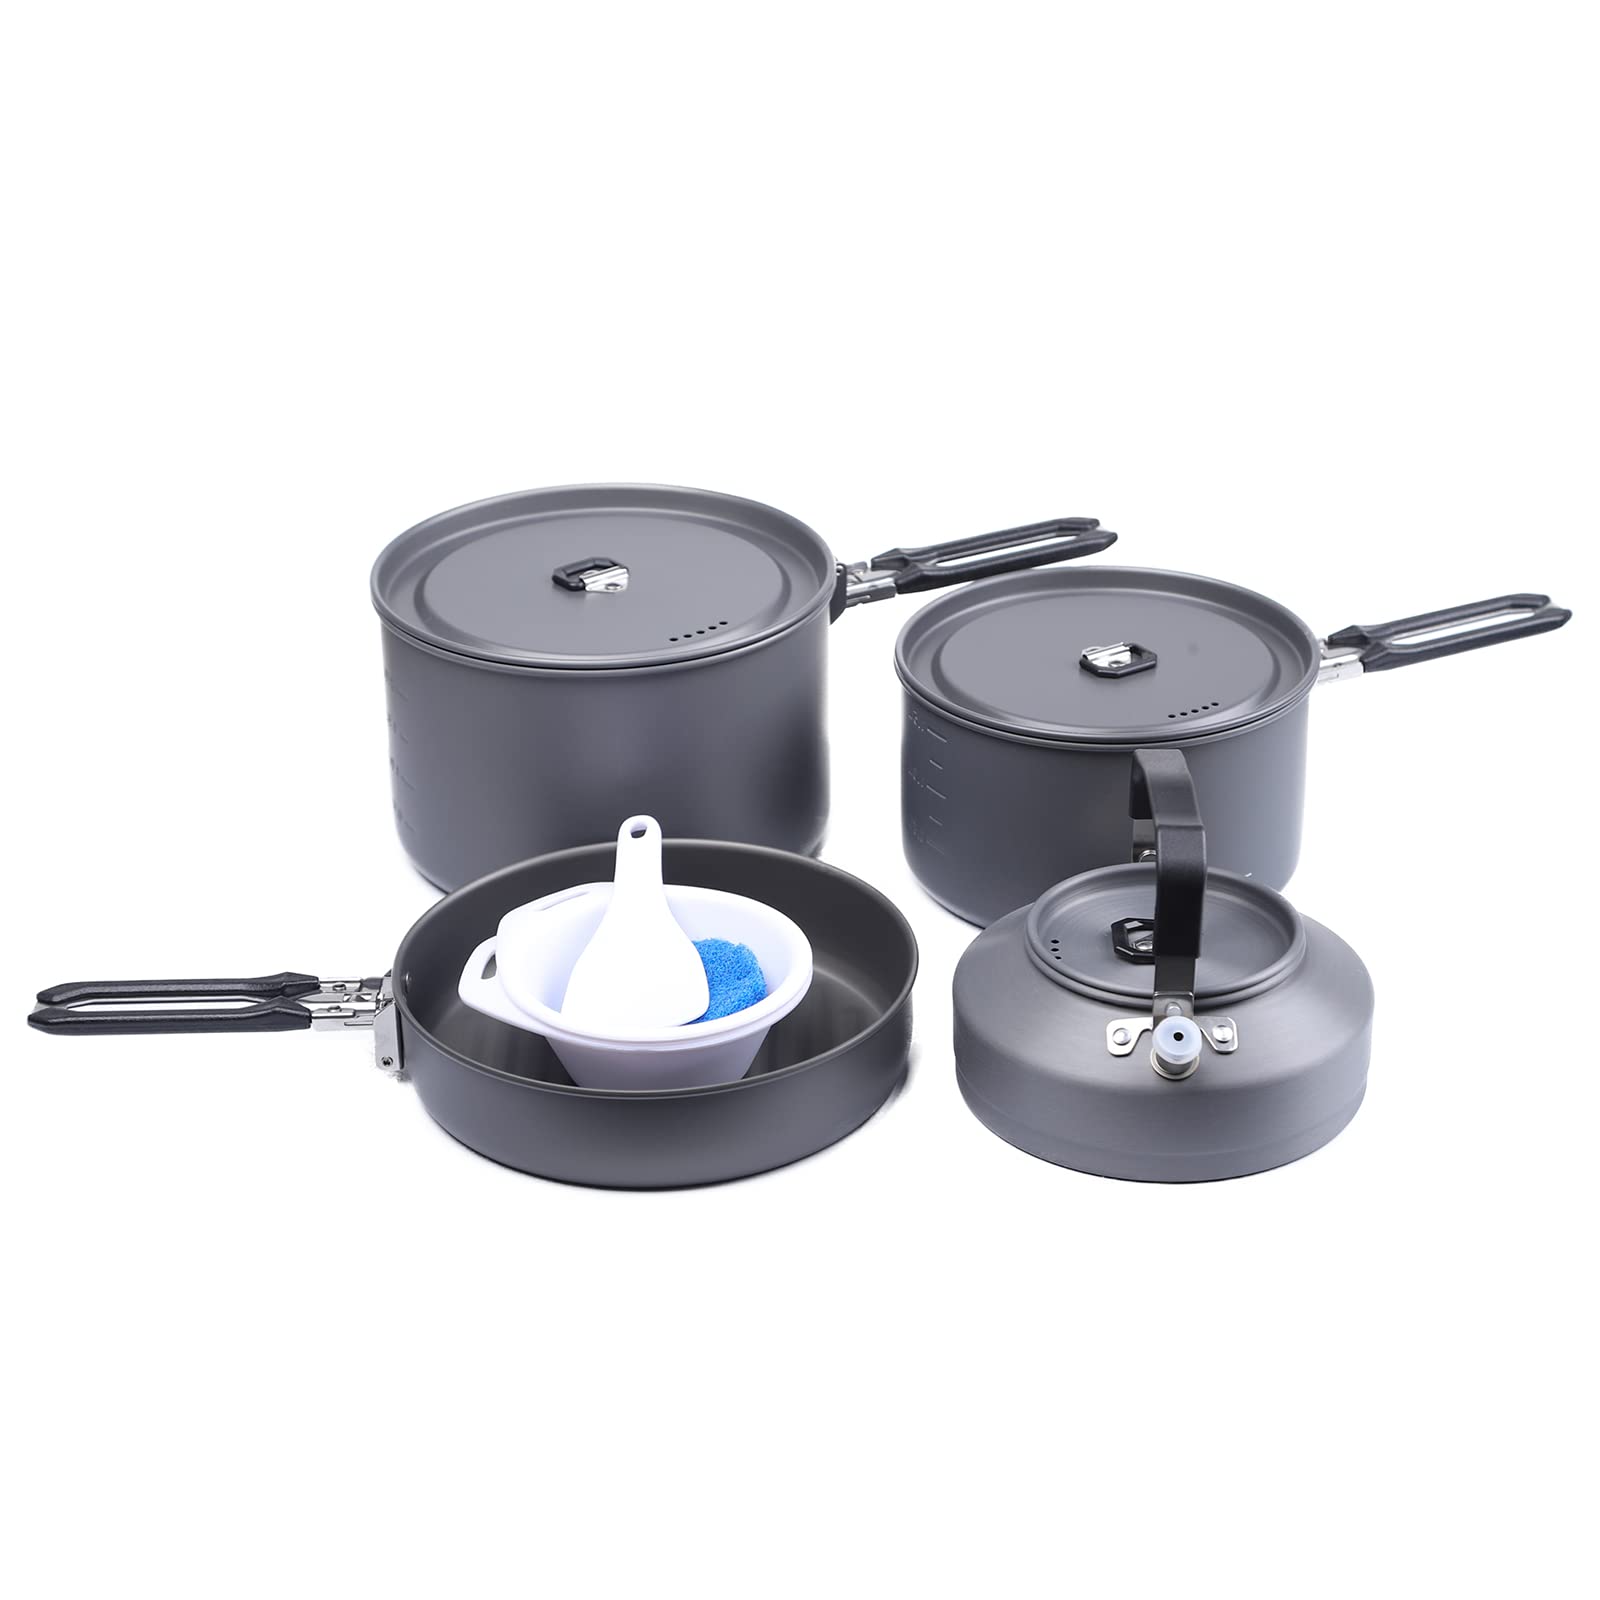 Fire-Maple Feast 4 Piece camping cookware camping Pot Set cookware Kit Outdoor cookware Set with Pots, Kettle, Saucepans and Spa